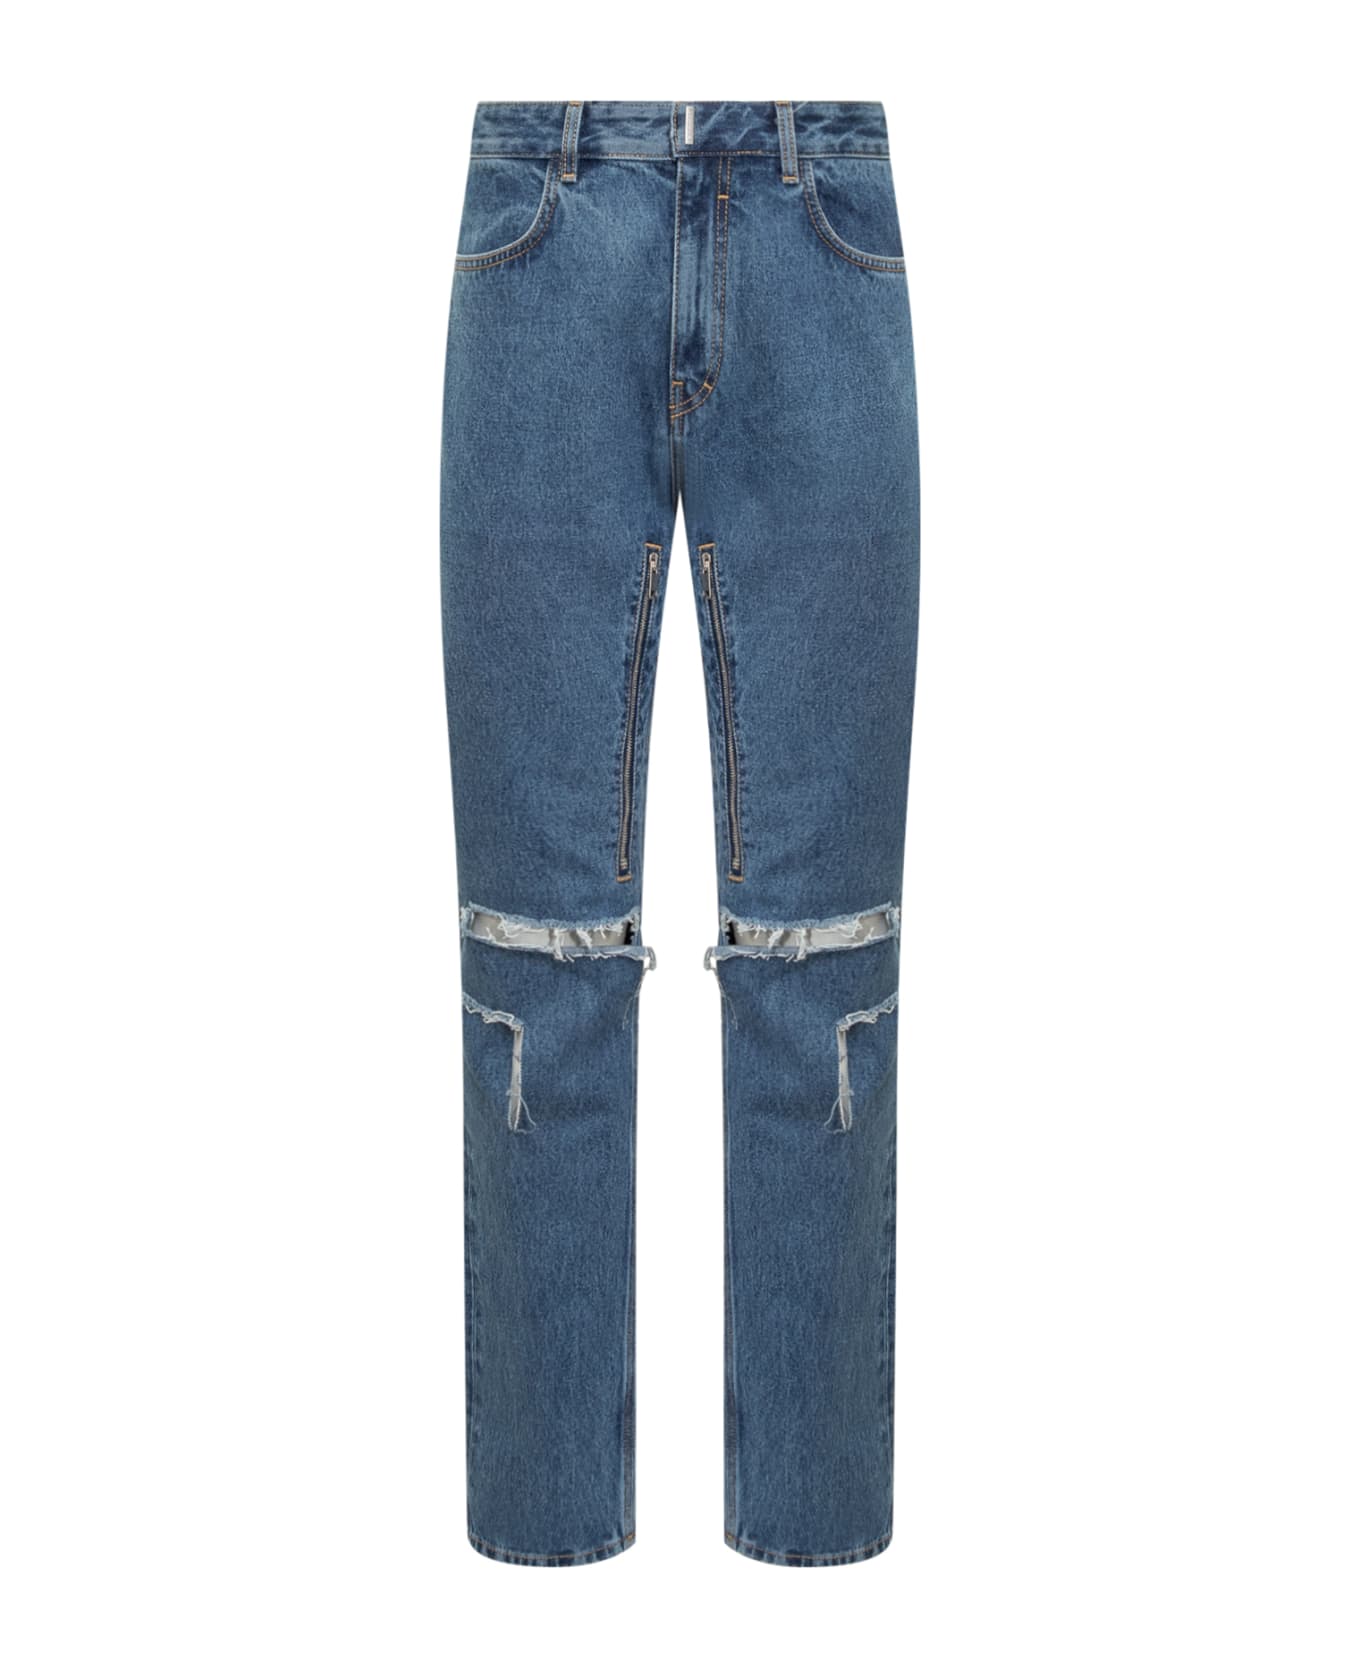 Givenchy Jeans With Zip And Rips Details - INDIGO BLUE